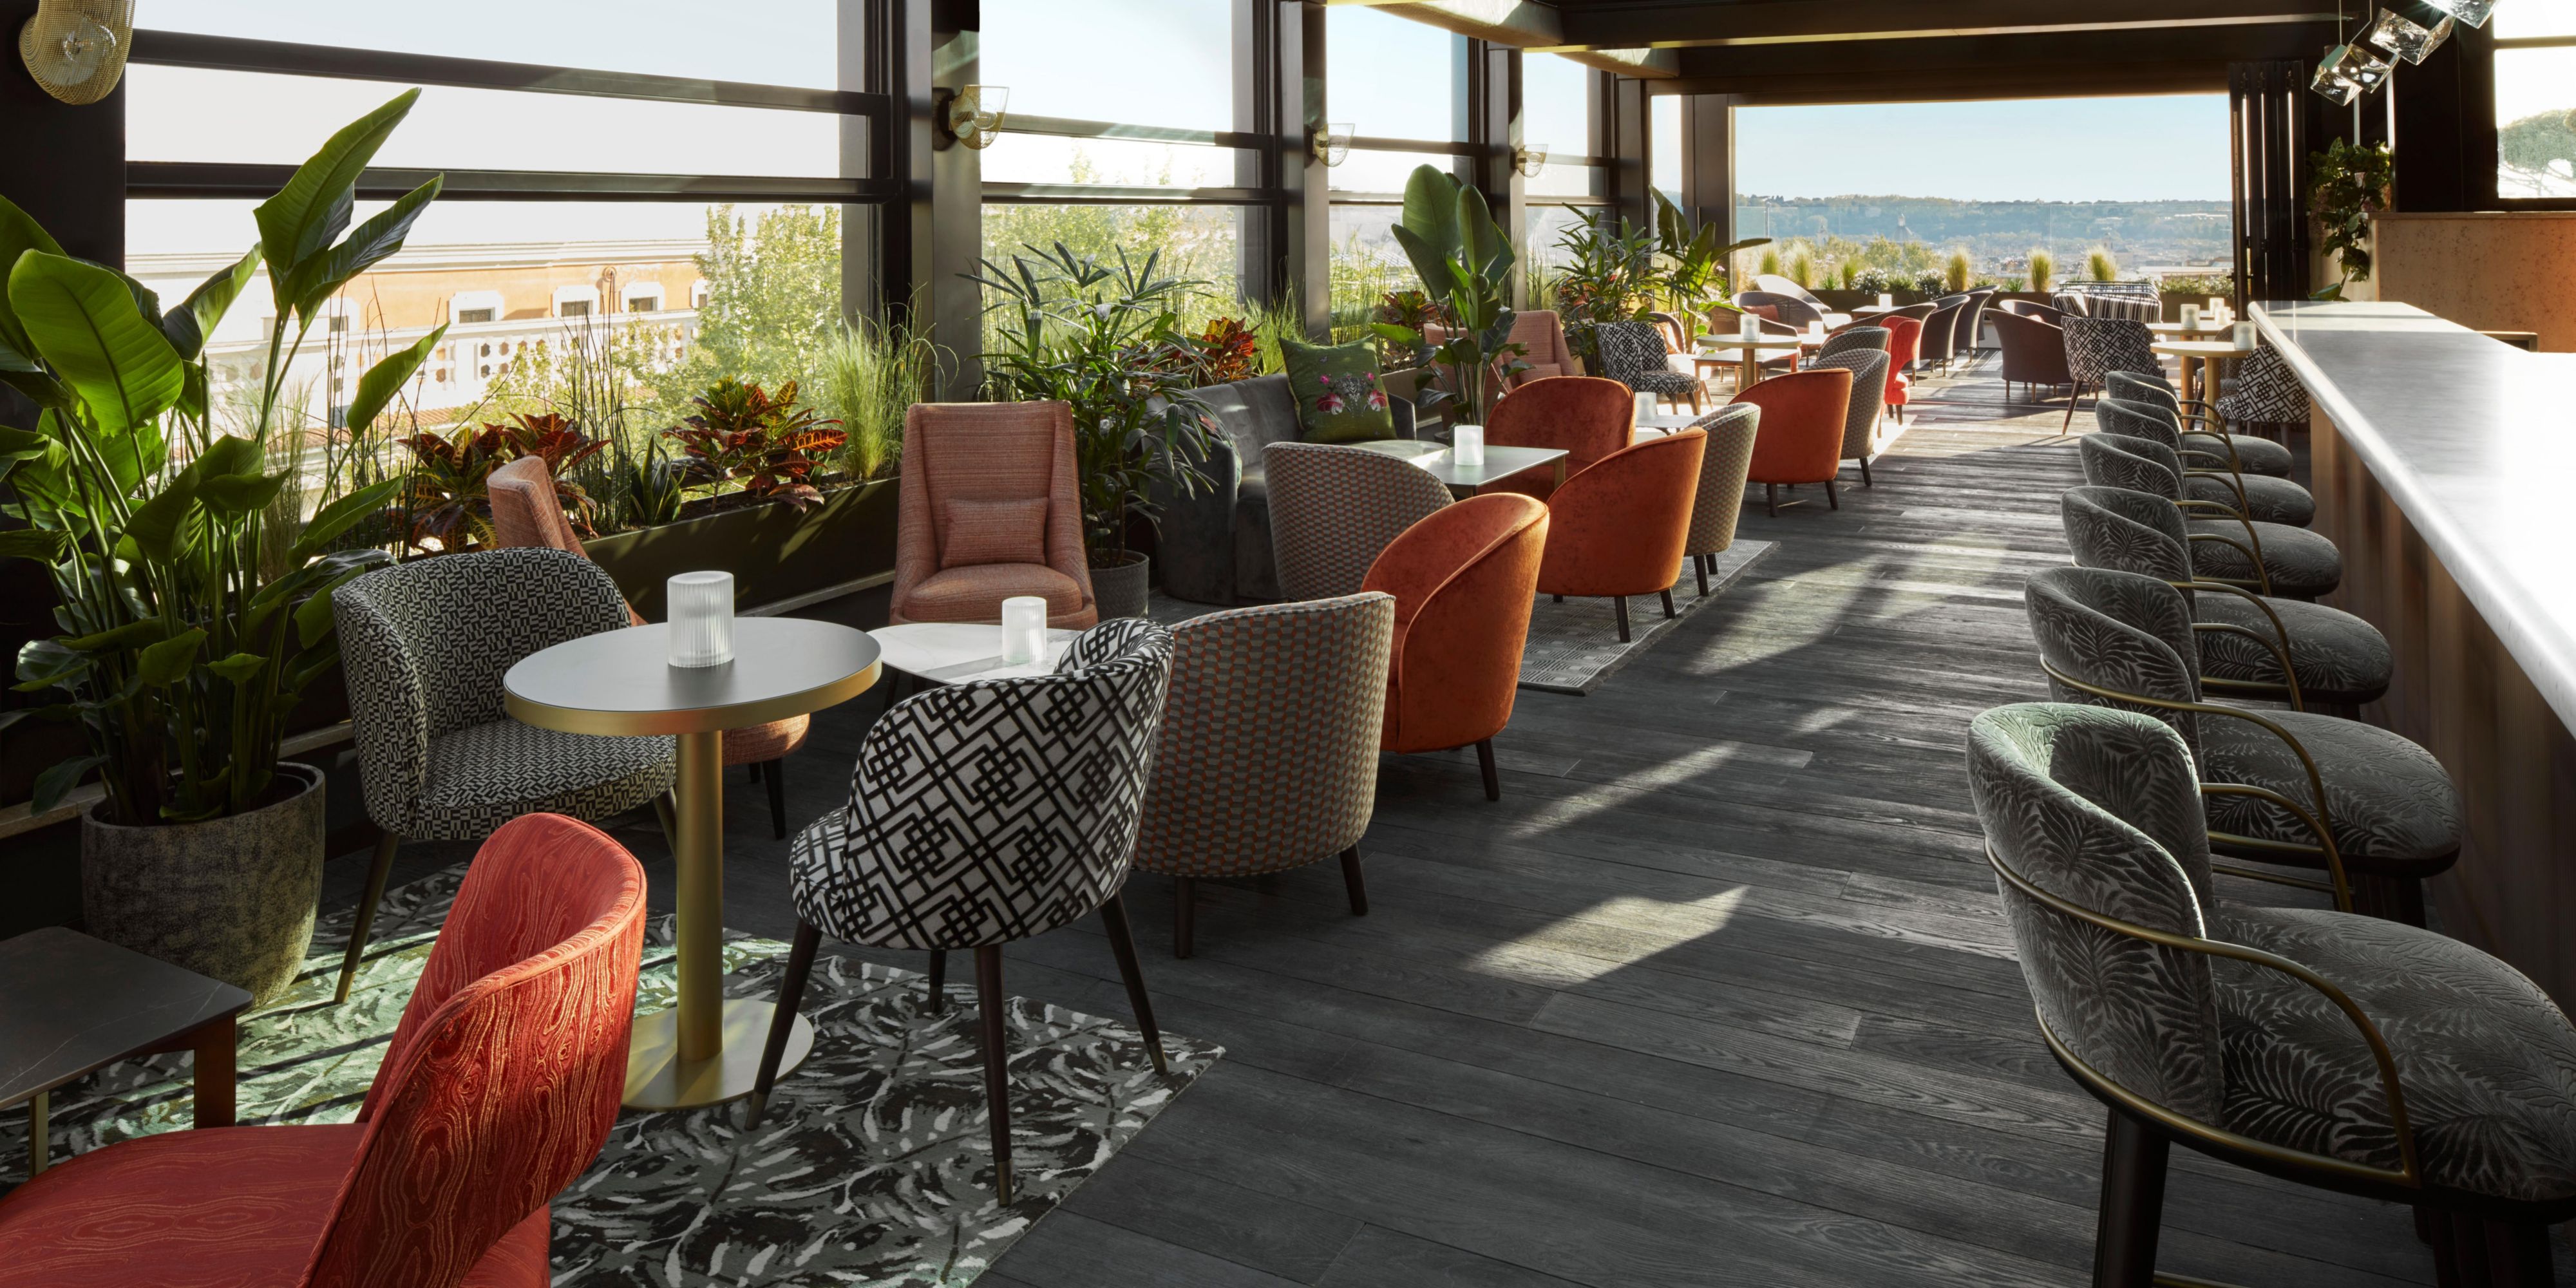 Experience breathtaking views from our rooftop oasis. Whether you're here for a romantic evening, a lively celebration, or a peaceful escape, our rooftop is the perfect setting to unwind and enjoy Rome's cityscape. The ambiance is unmatched, with live soft music playing as you watch the sunset or the stars twinkle above.